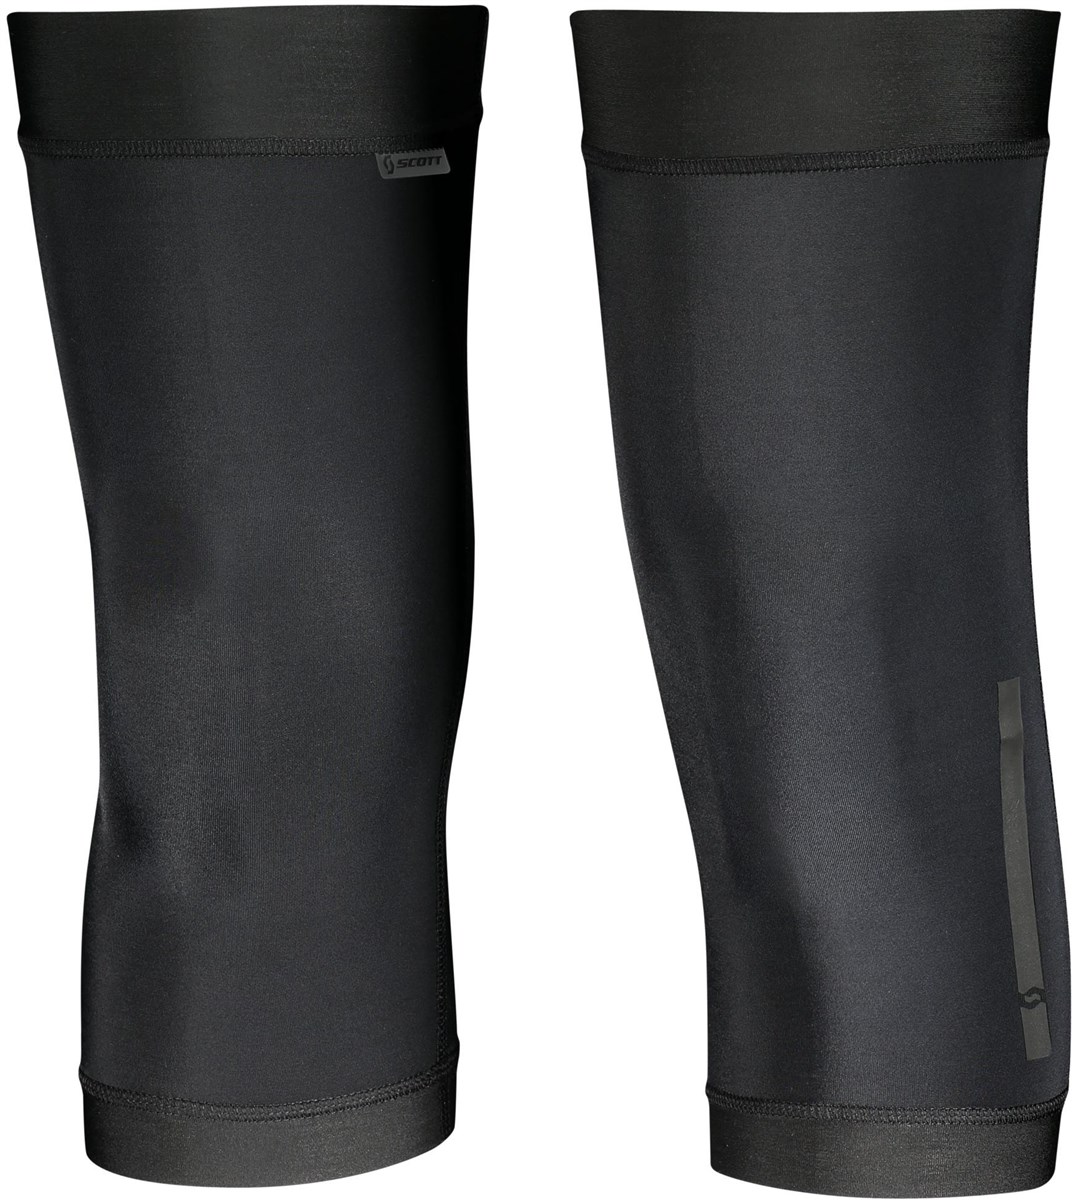 Scott AS 30 Knee Warmers product image